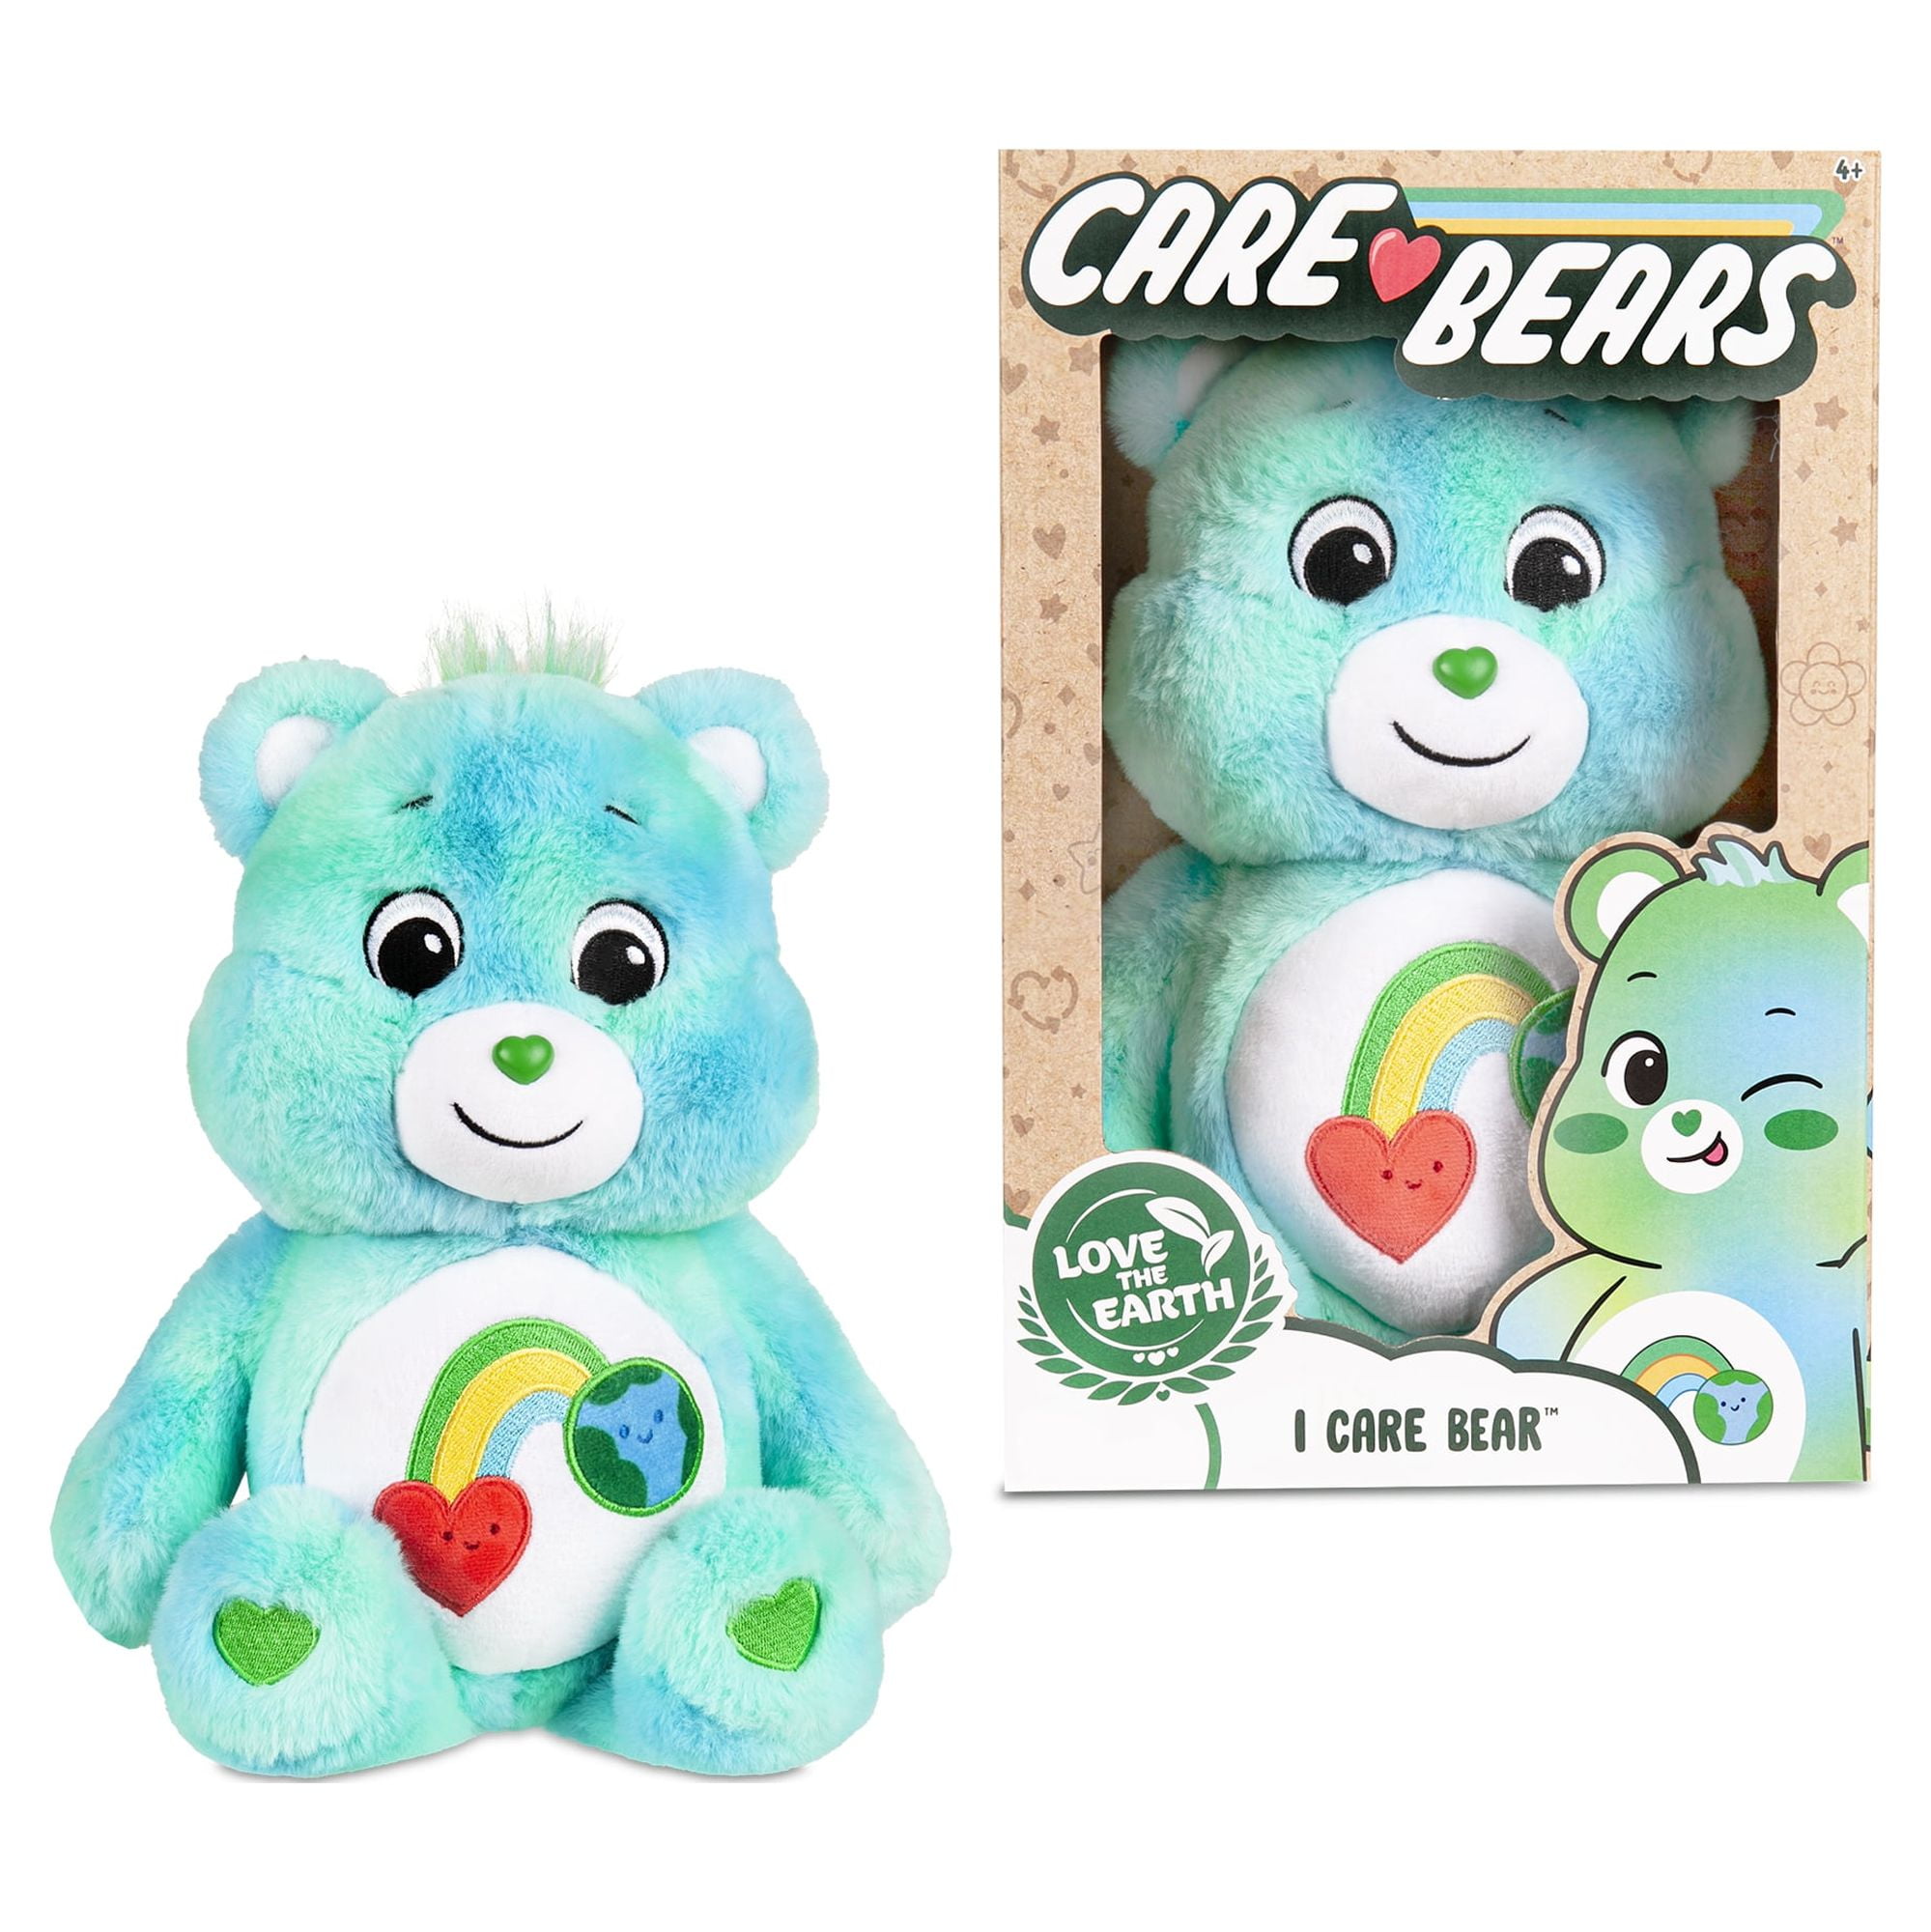 14" Care Bears Plush Toy (I Care) $8.50 + Free S&H w/ Walmart+ or $35+